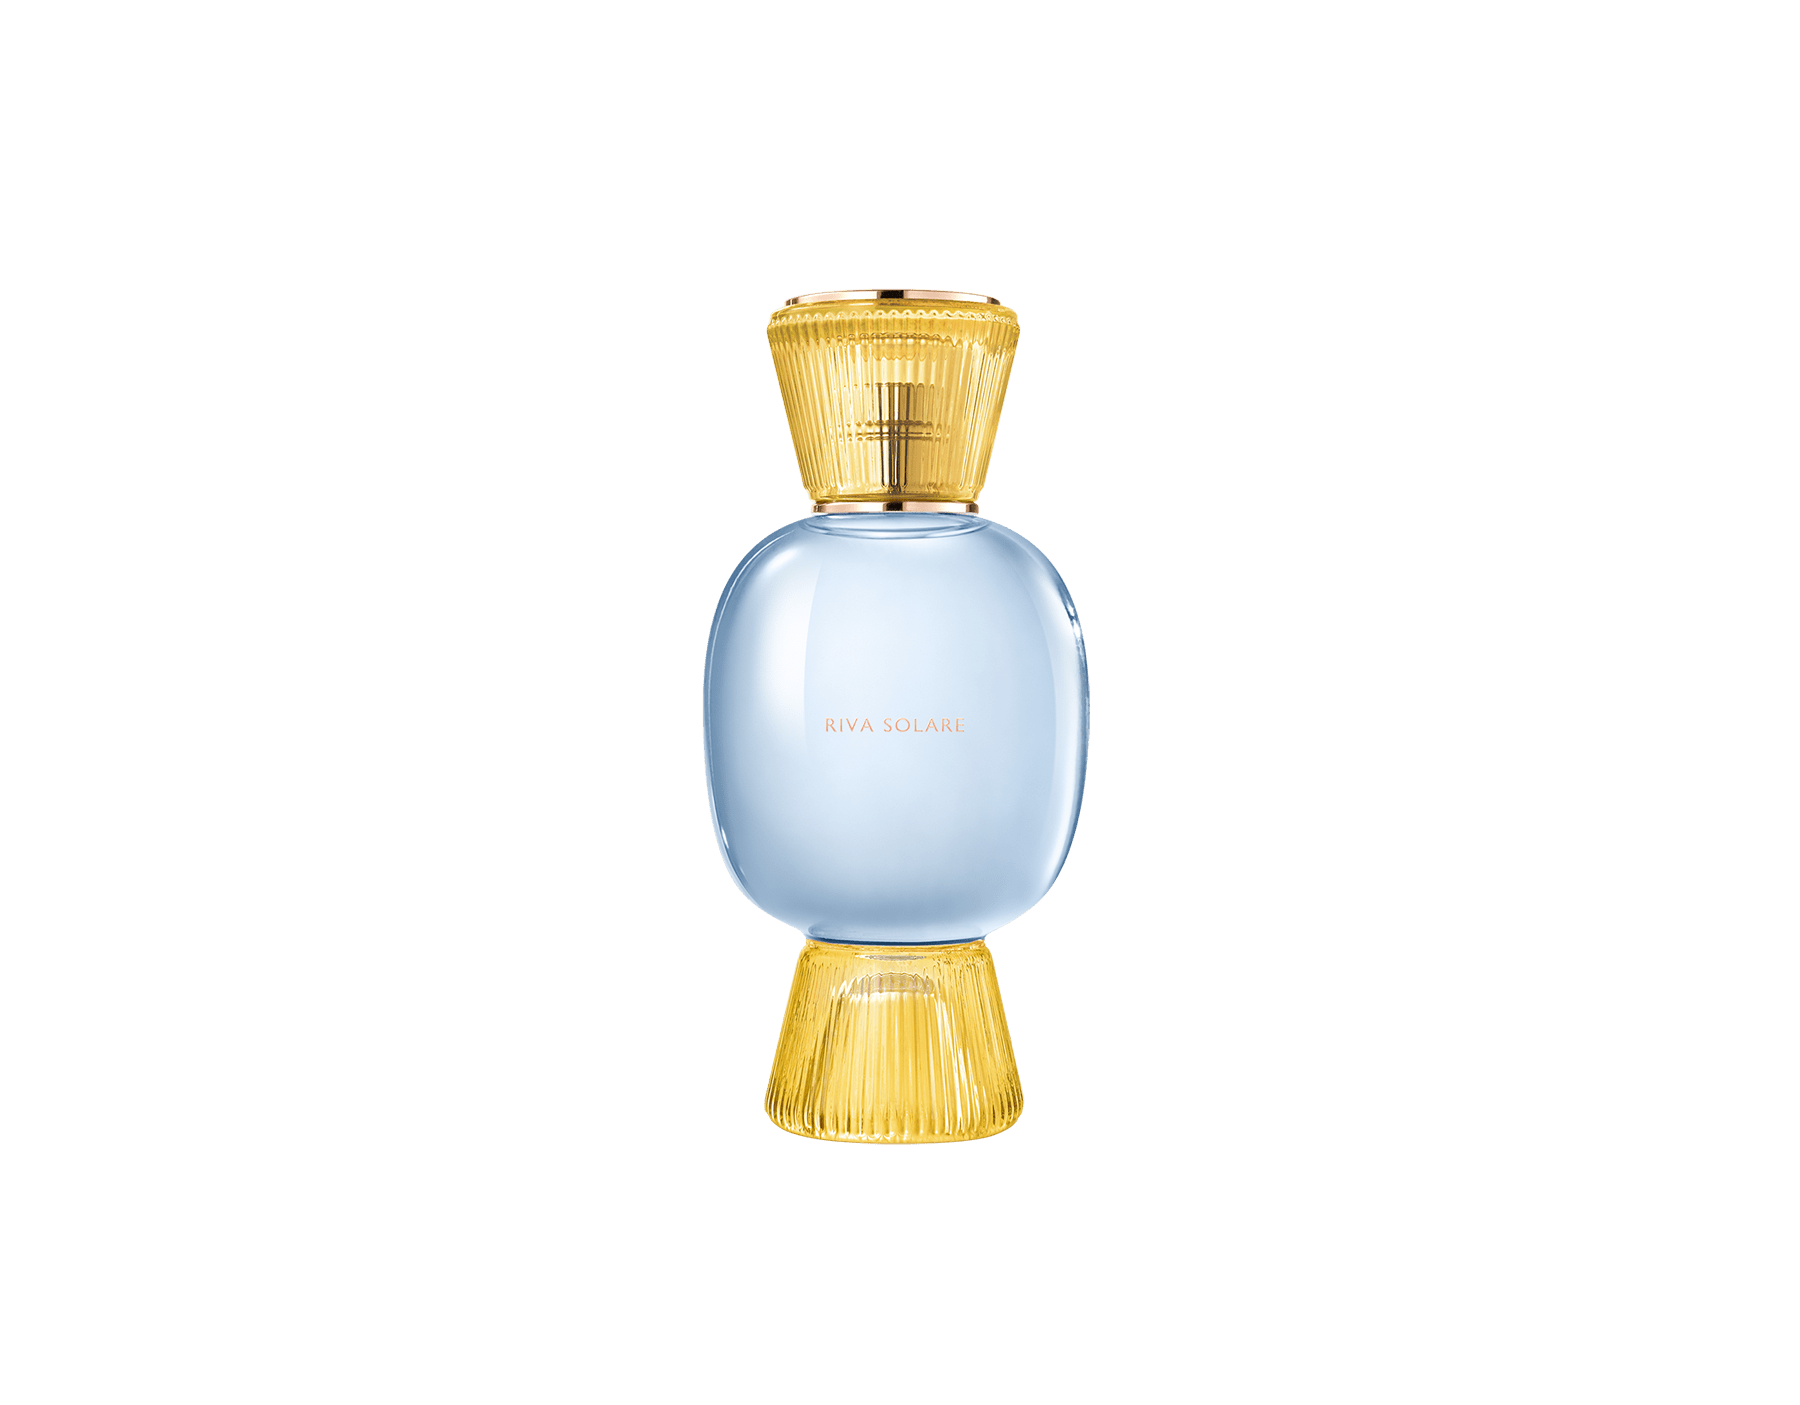 “Riva Solare is the endless Italian holiday.” Jacques Cavallier A sparkling citrus to embody the energising excitement of a ride on the Mediterranean Sea 41252 image 1